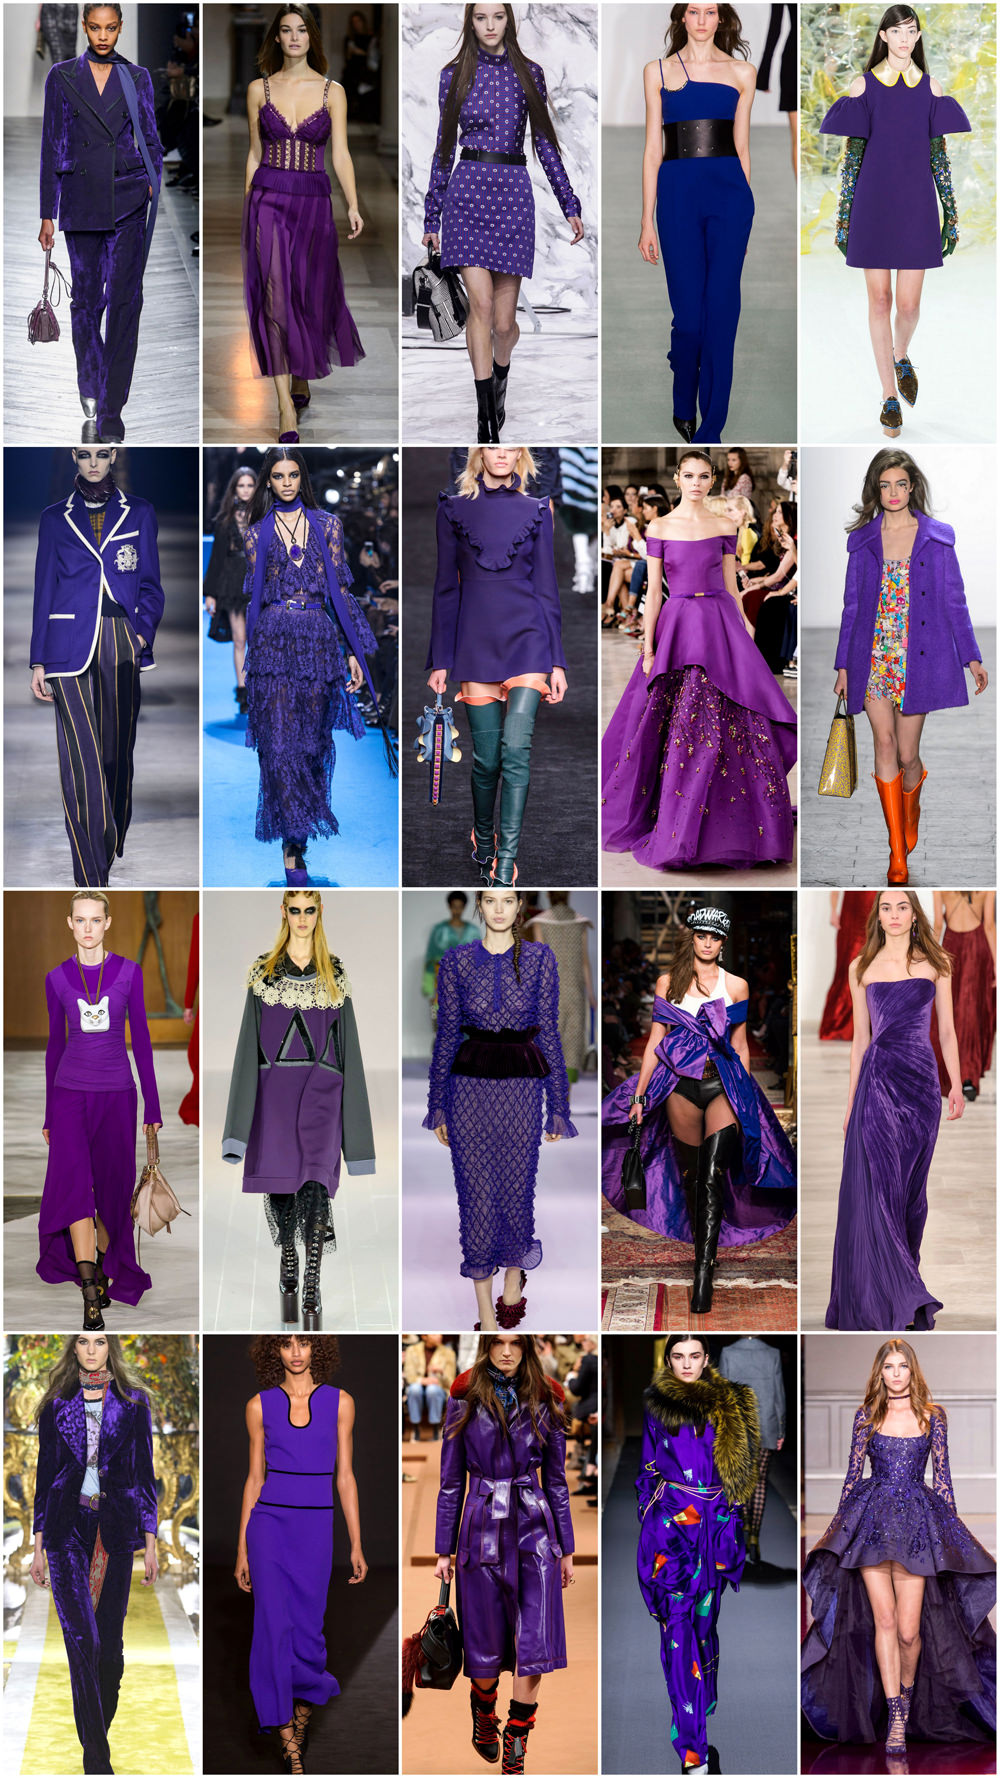 Translating-Fall-2016-Trends-Purple-Fashion-Accessories-Bags-Shoes-Jewelry-Tom-Lorenzo-Site (3)